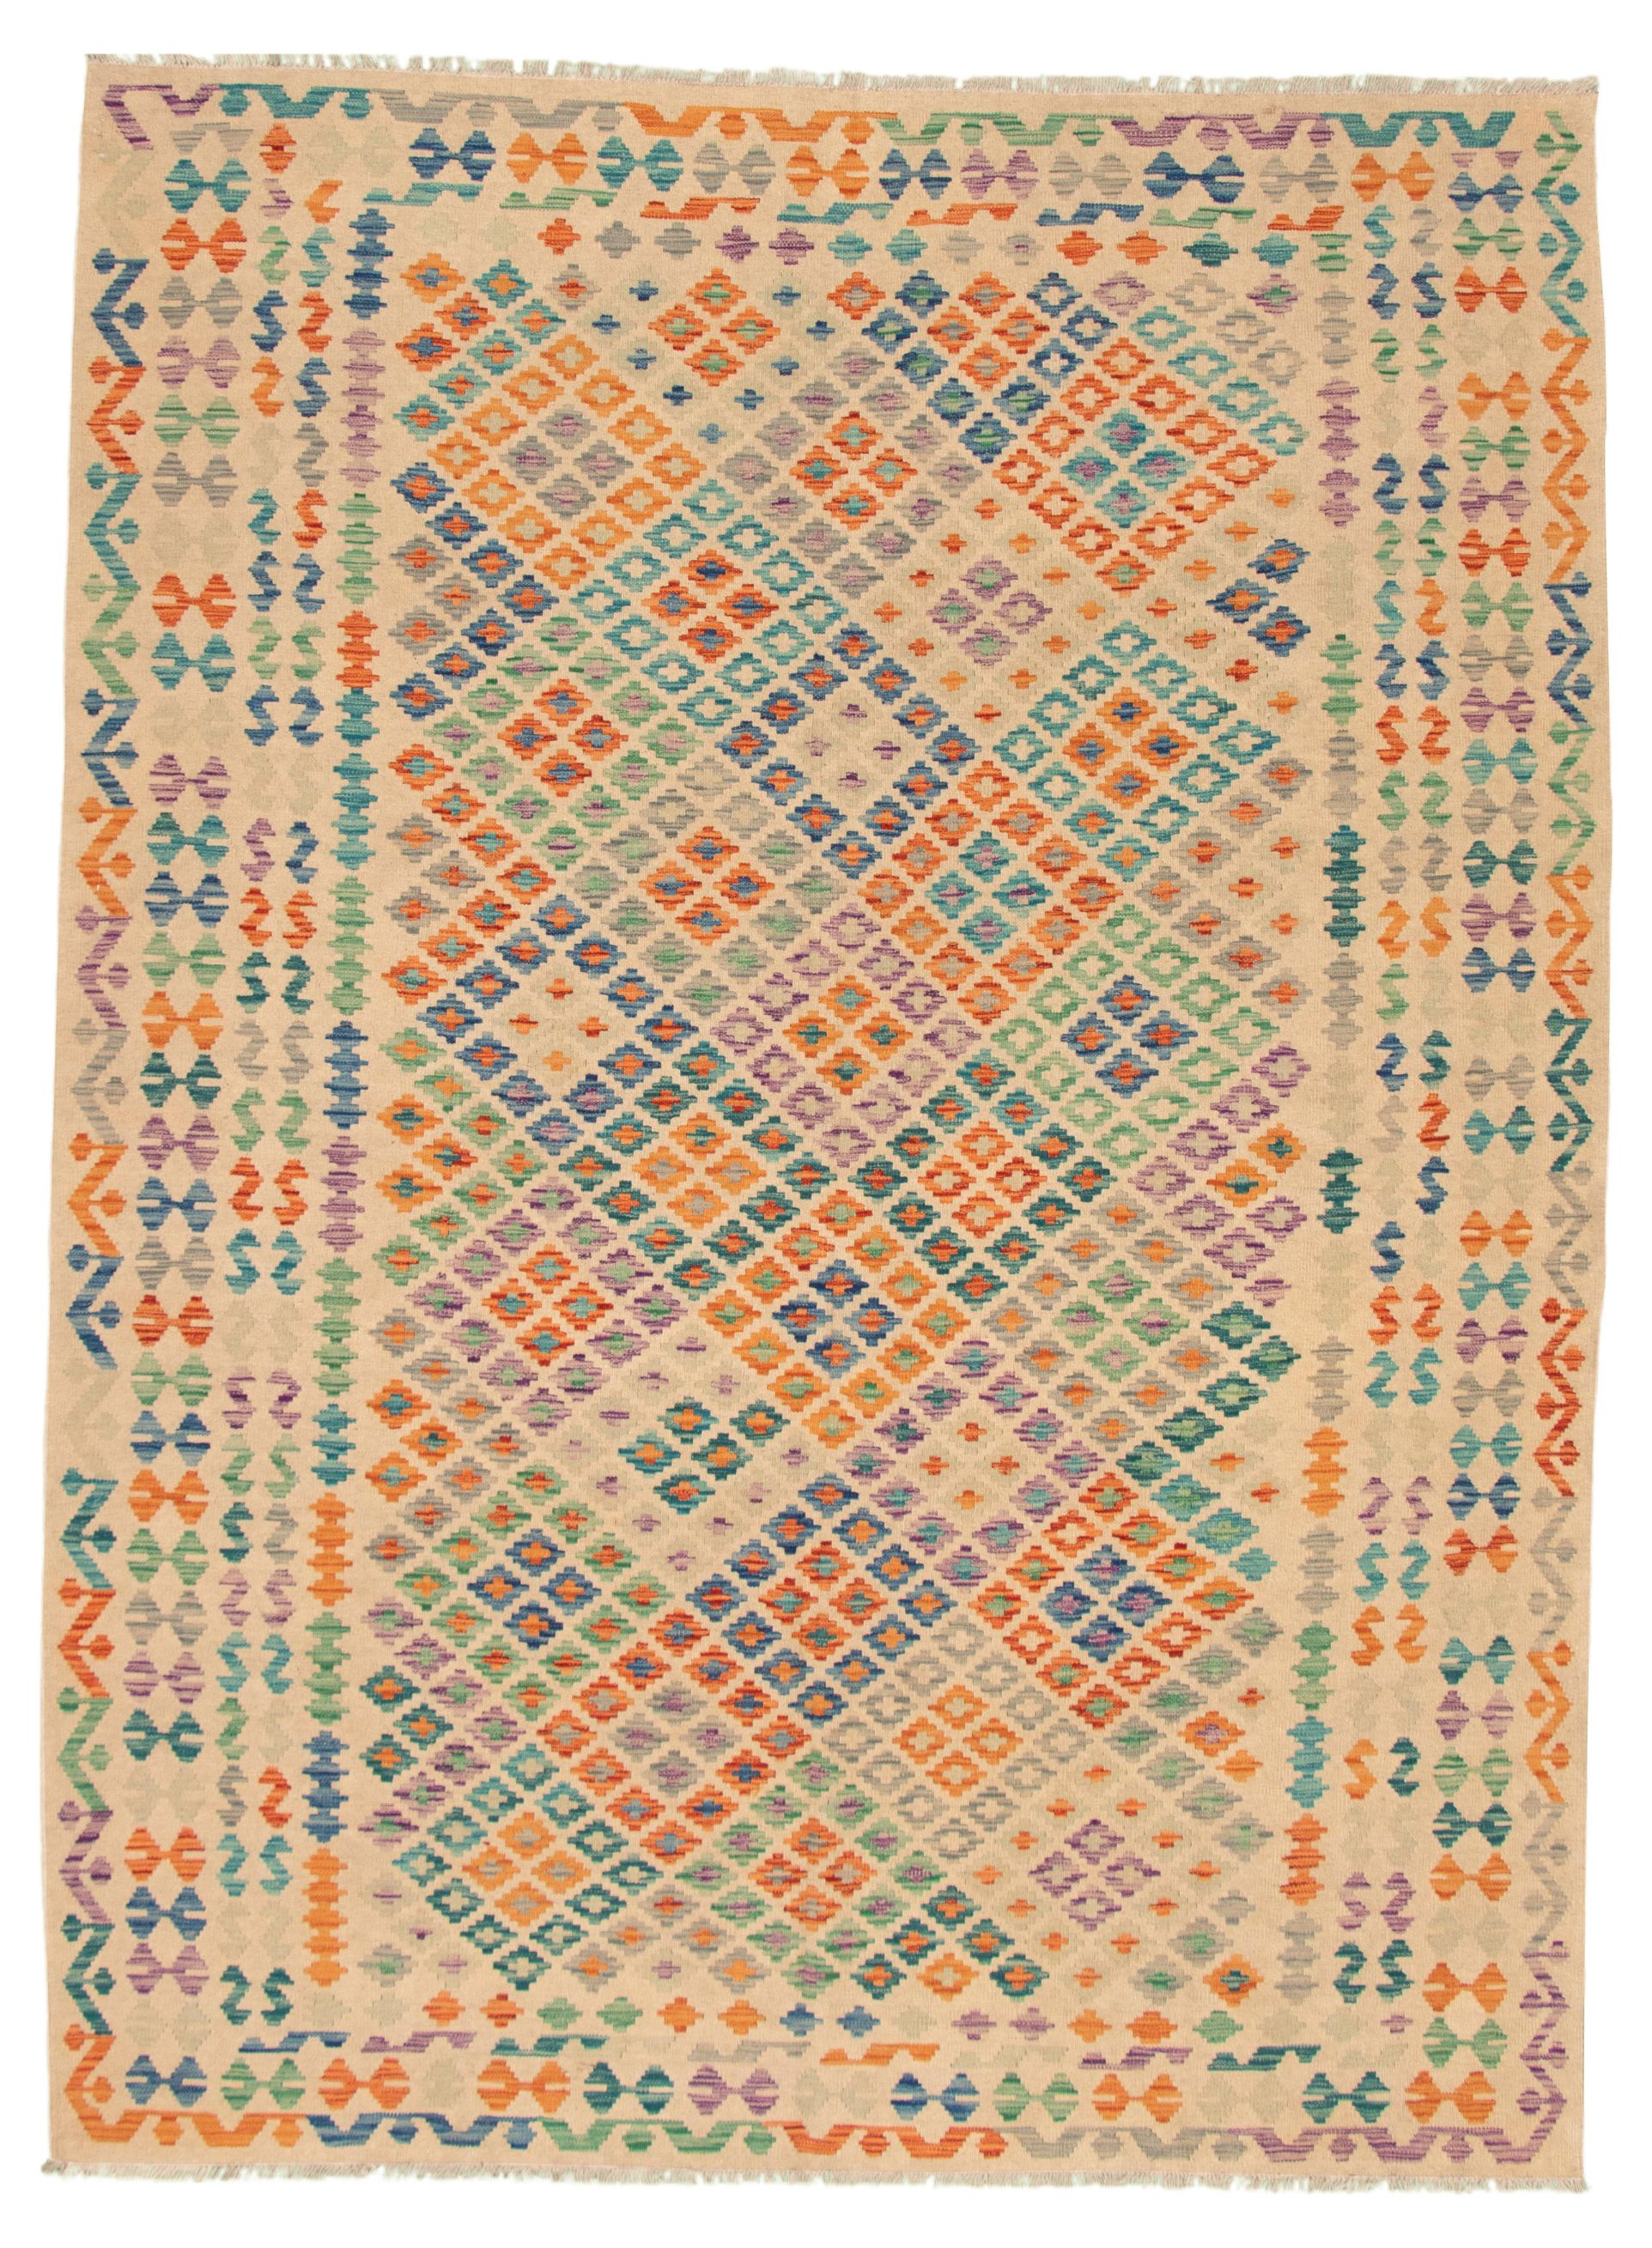 Hand woven Bold and Colorful  Beige Wool Kilim 8'5" x 11'5" Size: 8'5" x 11'5"  